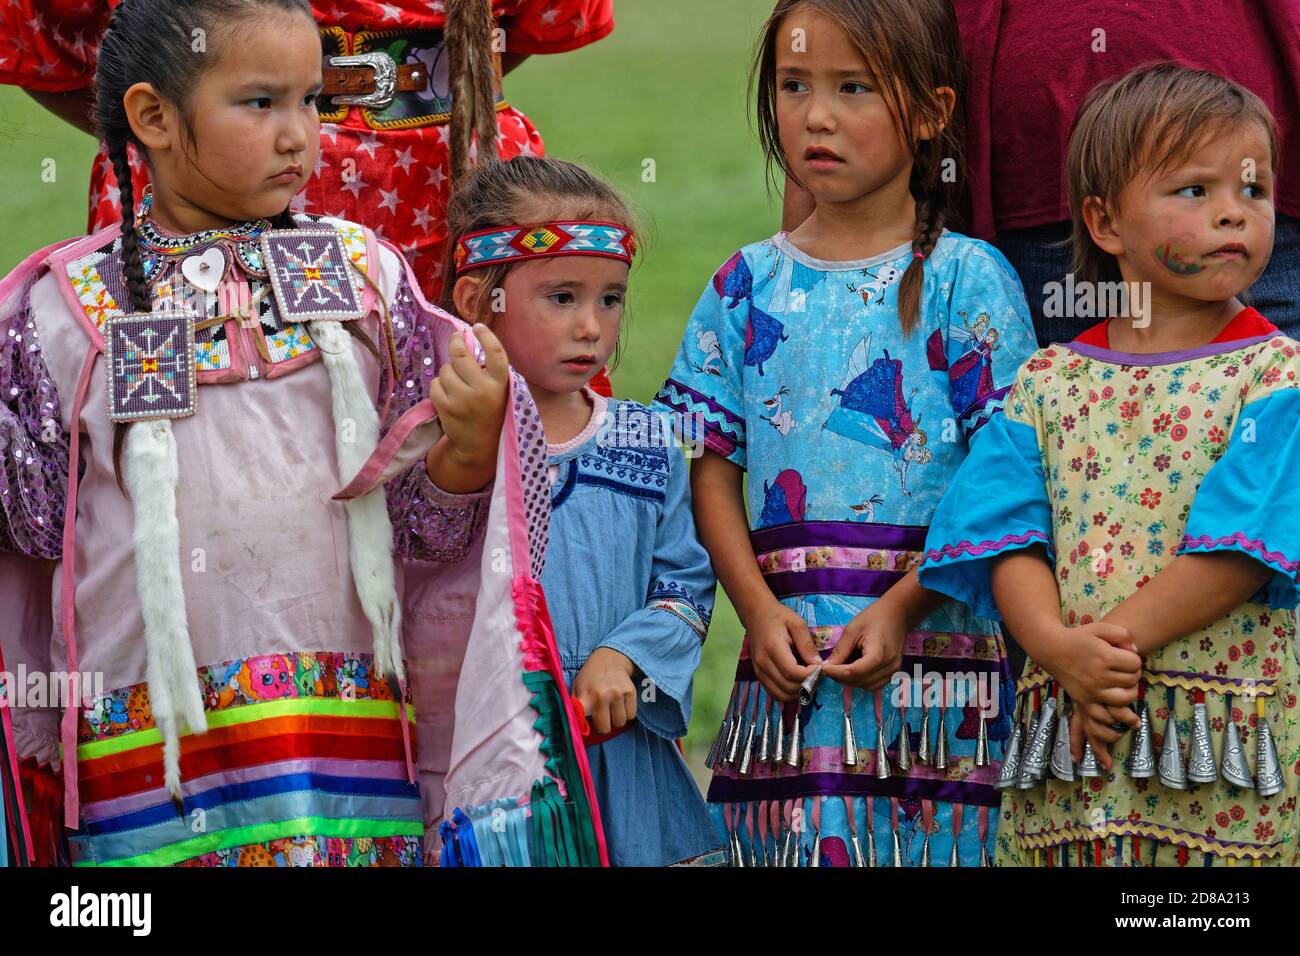 BISMARK, NORTH DAKOTA, September 9, 2018 : Children at the 49th annual United Tribes Pow Wow, one large outdoor event that gathers more than 900 dance Stock Photo